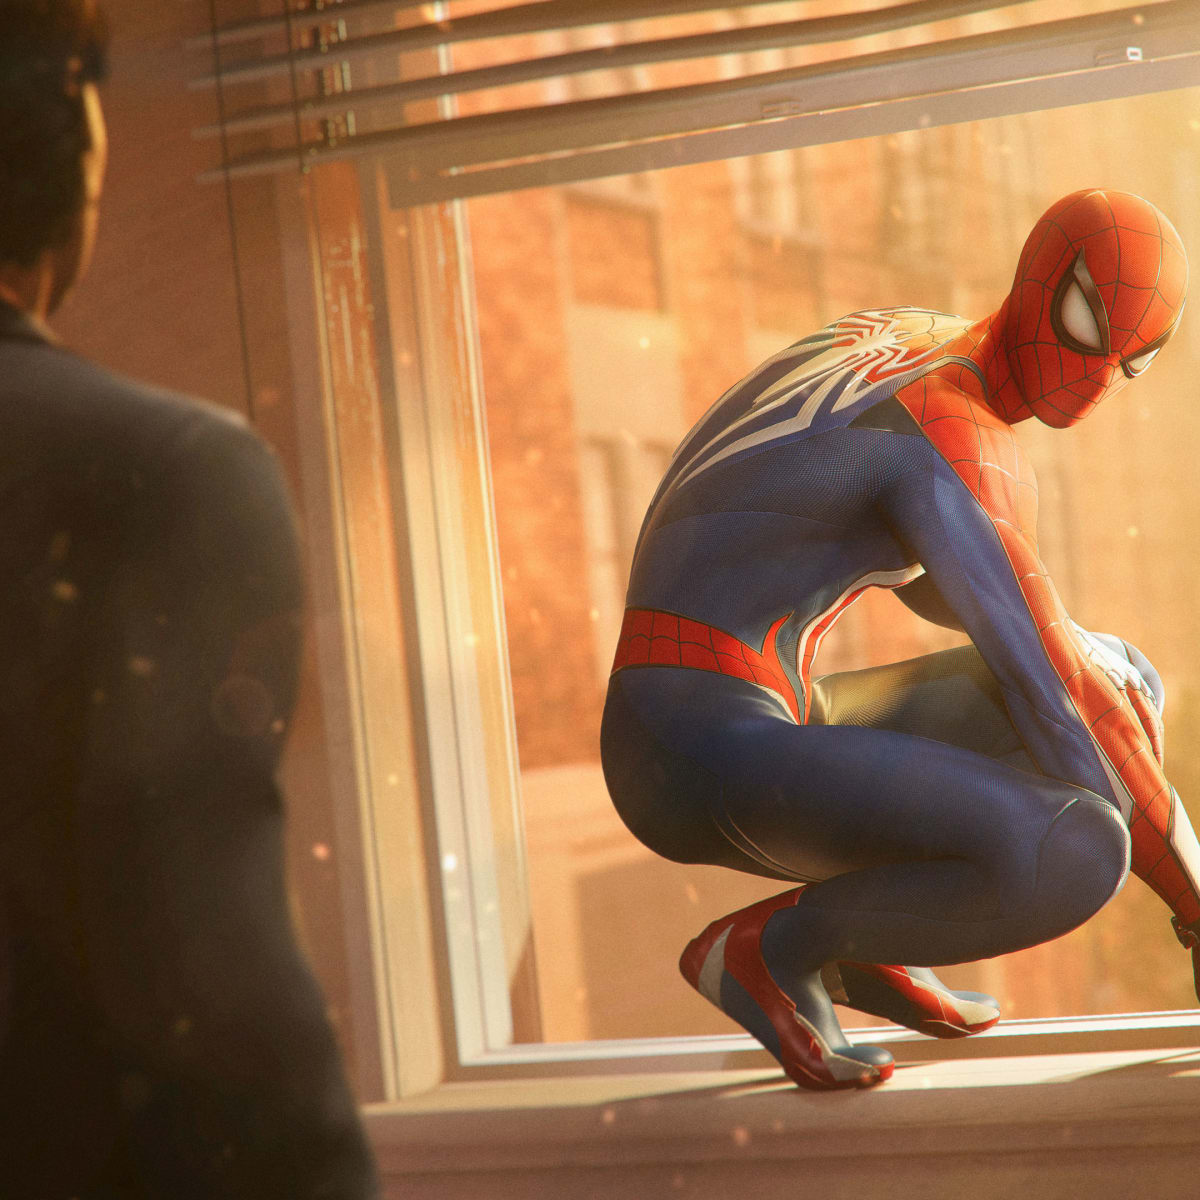 Spider-Man 2: PS5 developer on stories, game length, and what's